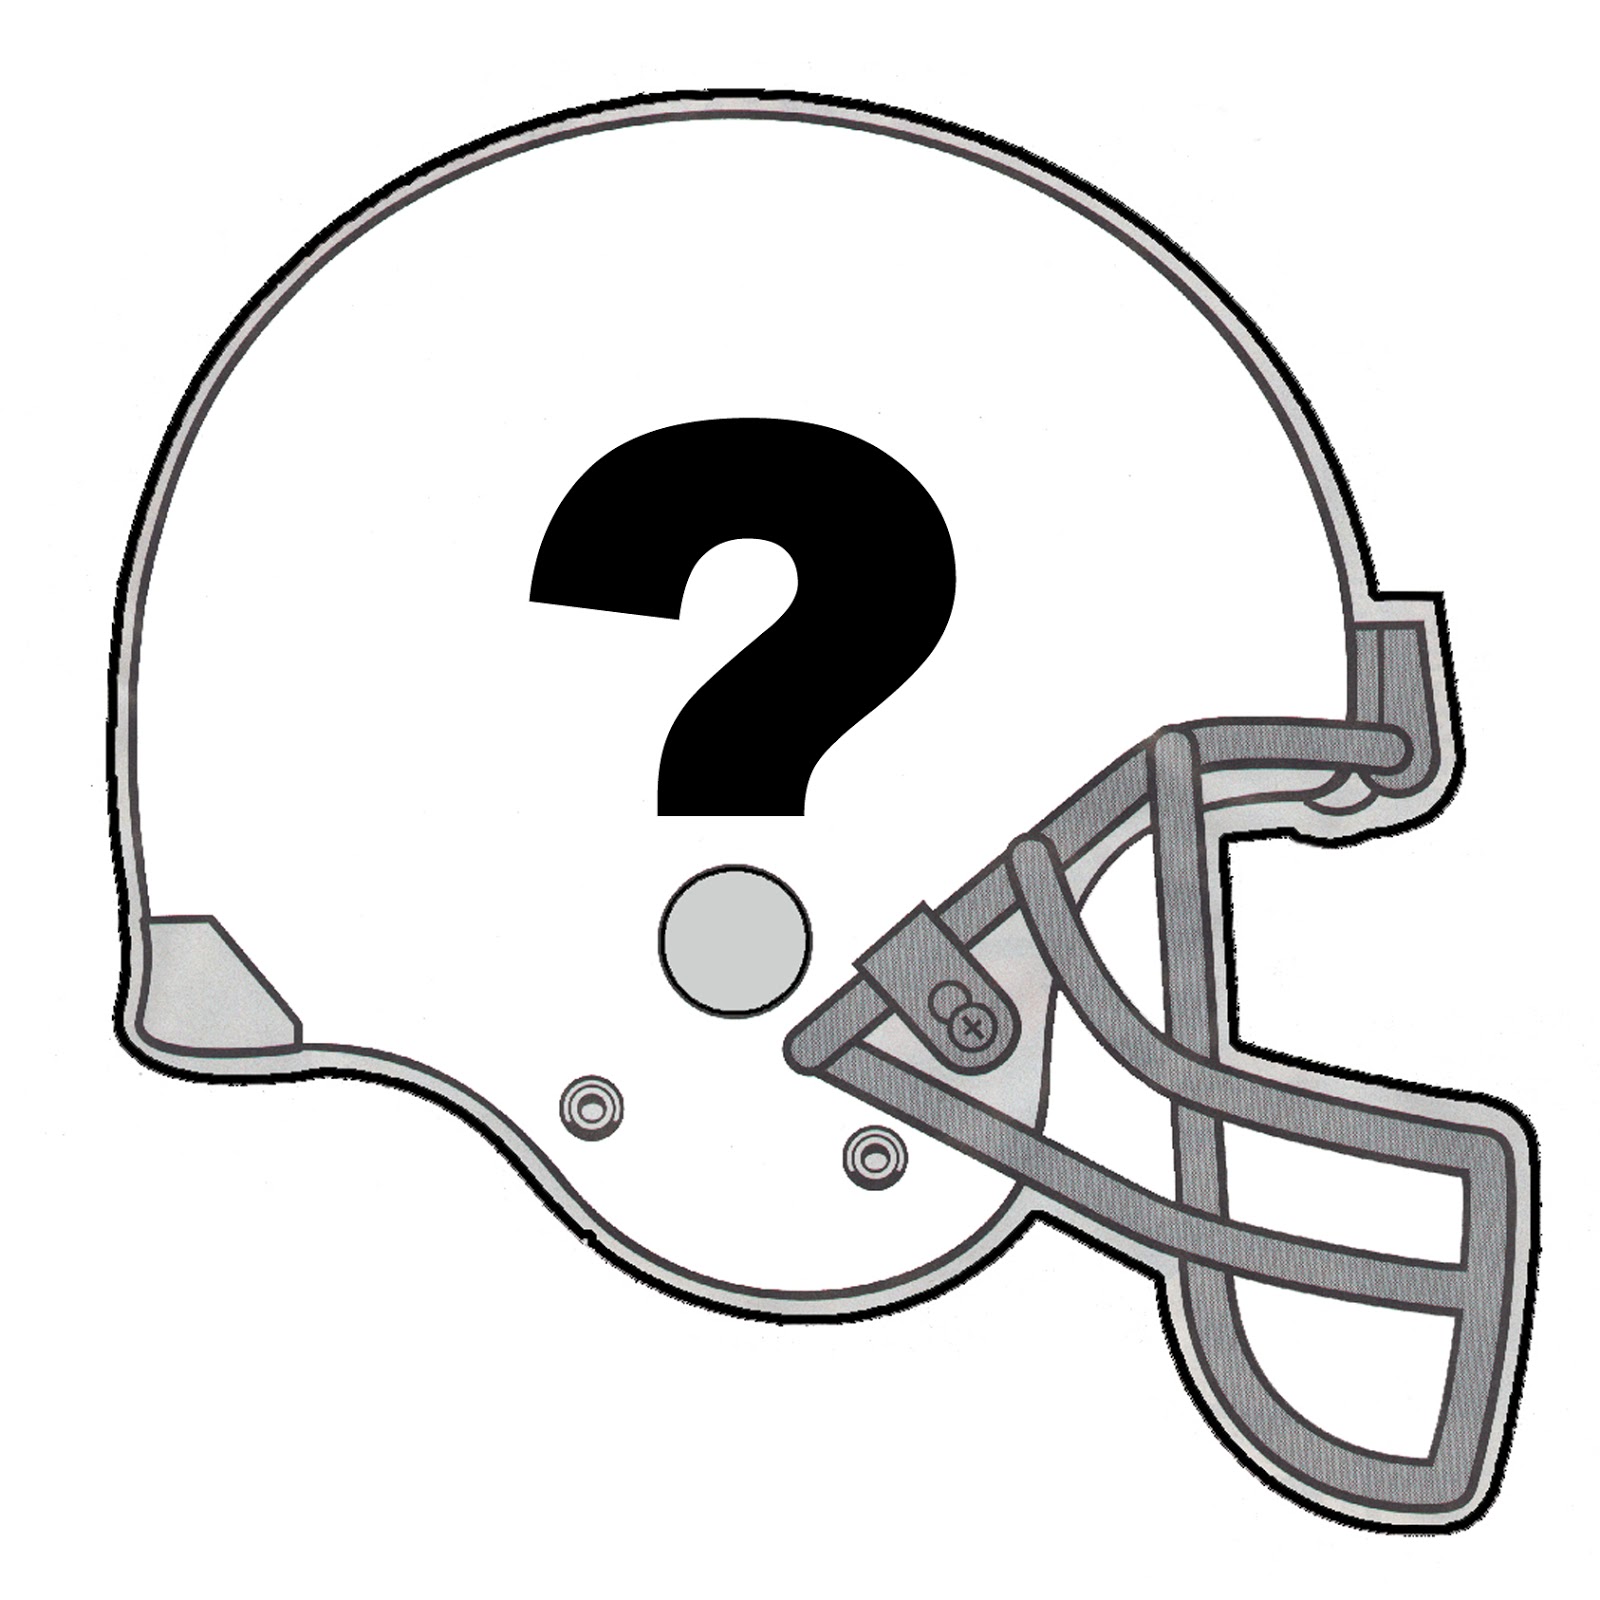 Football helmet steelers clip art person pointing clipart pittsburgh steelers